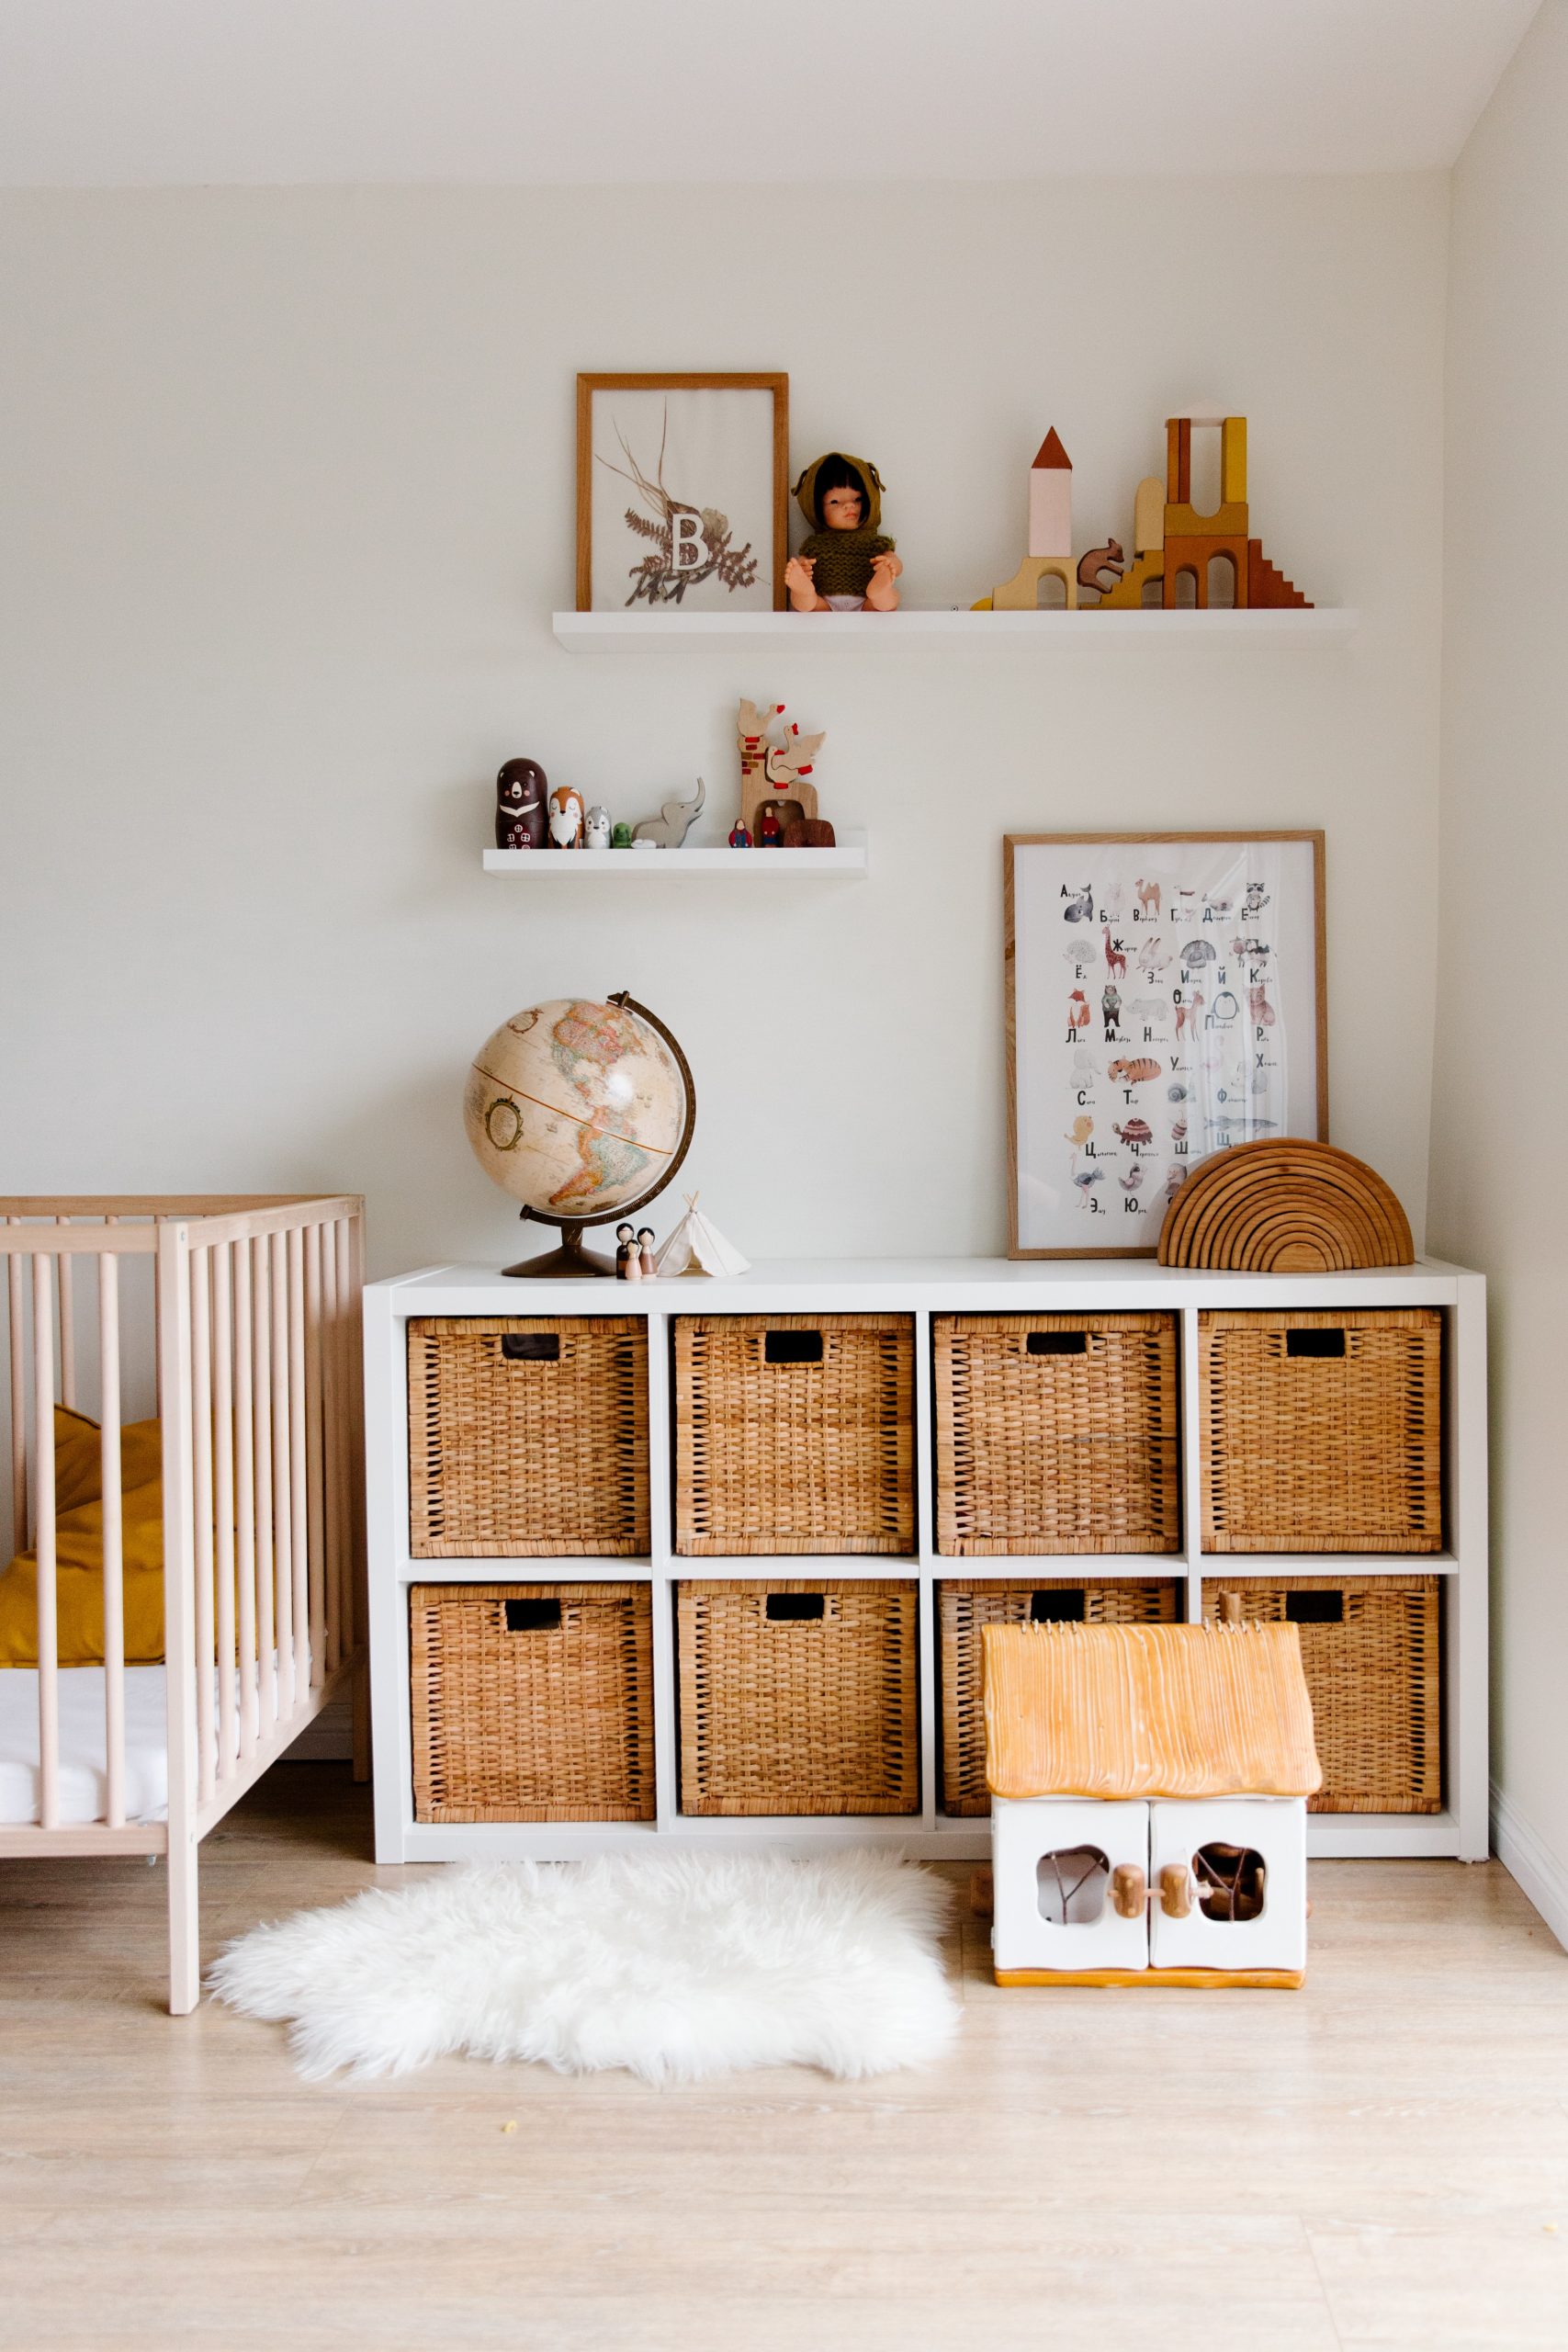 12 Easy & creative home storage ideas that save space